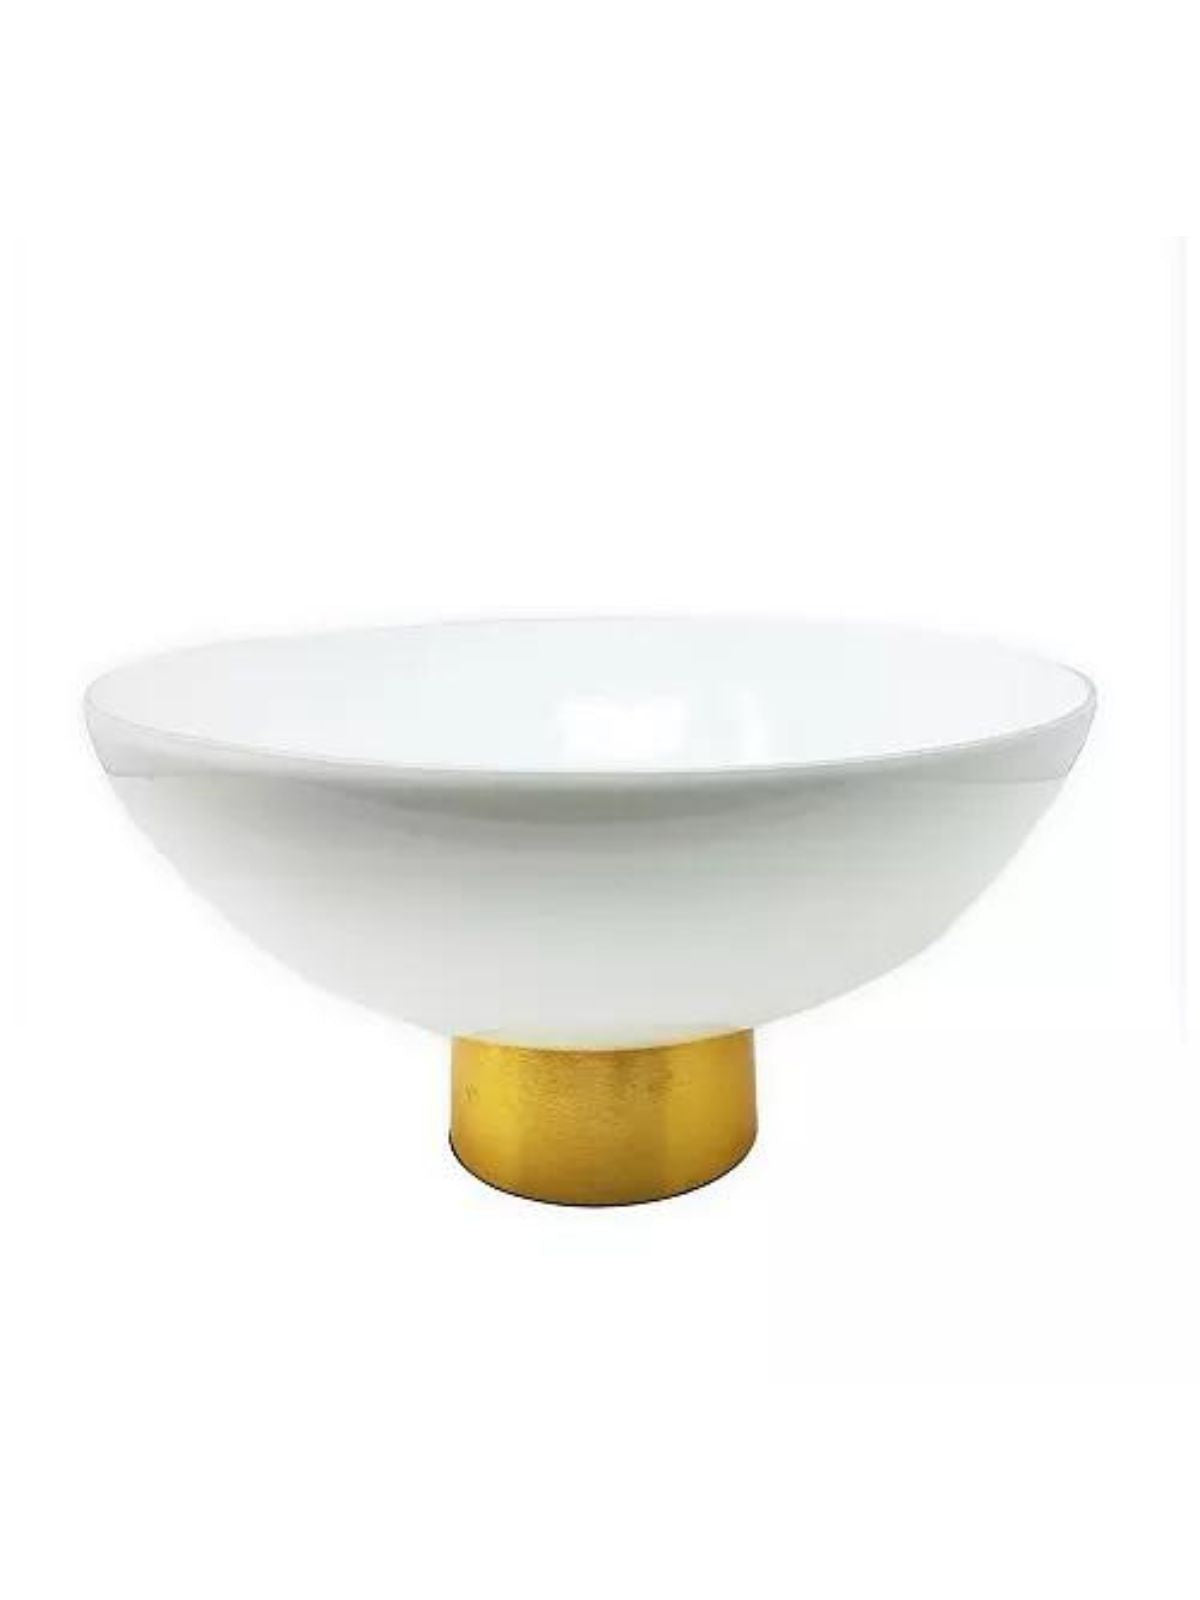 White Pearl Glass Footed Serving Bowl on Lustrous Gold Base, 11.5D. 